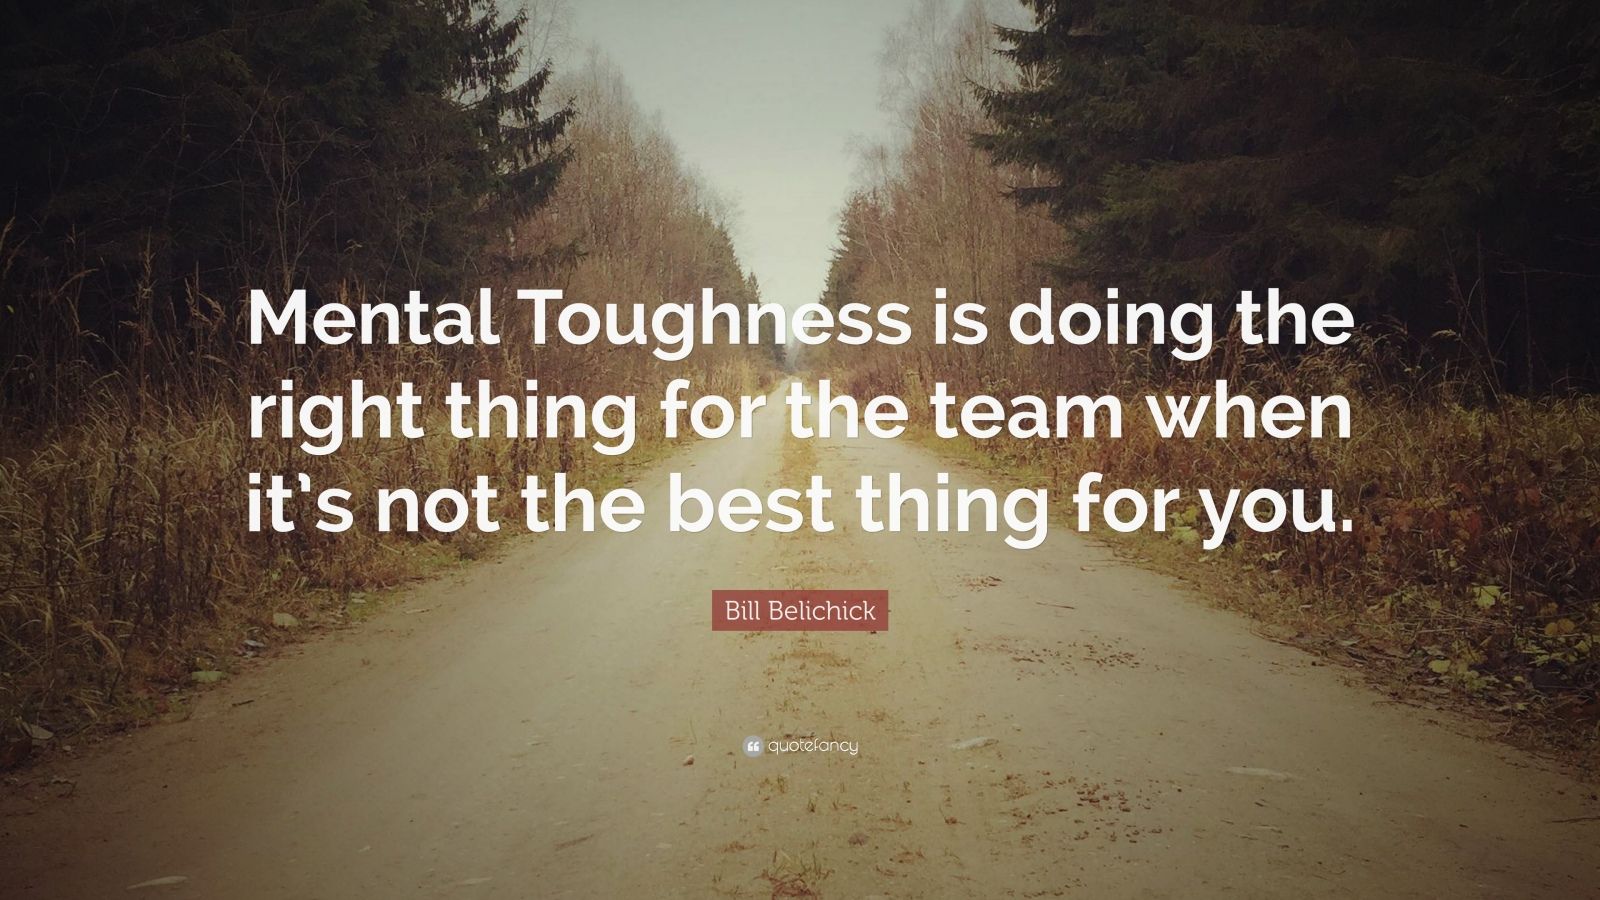 Bill Belichick Quote: “Mental Toughness is doing the right thing for